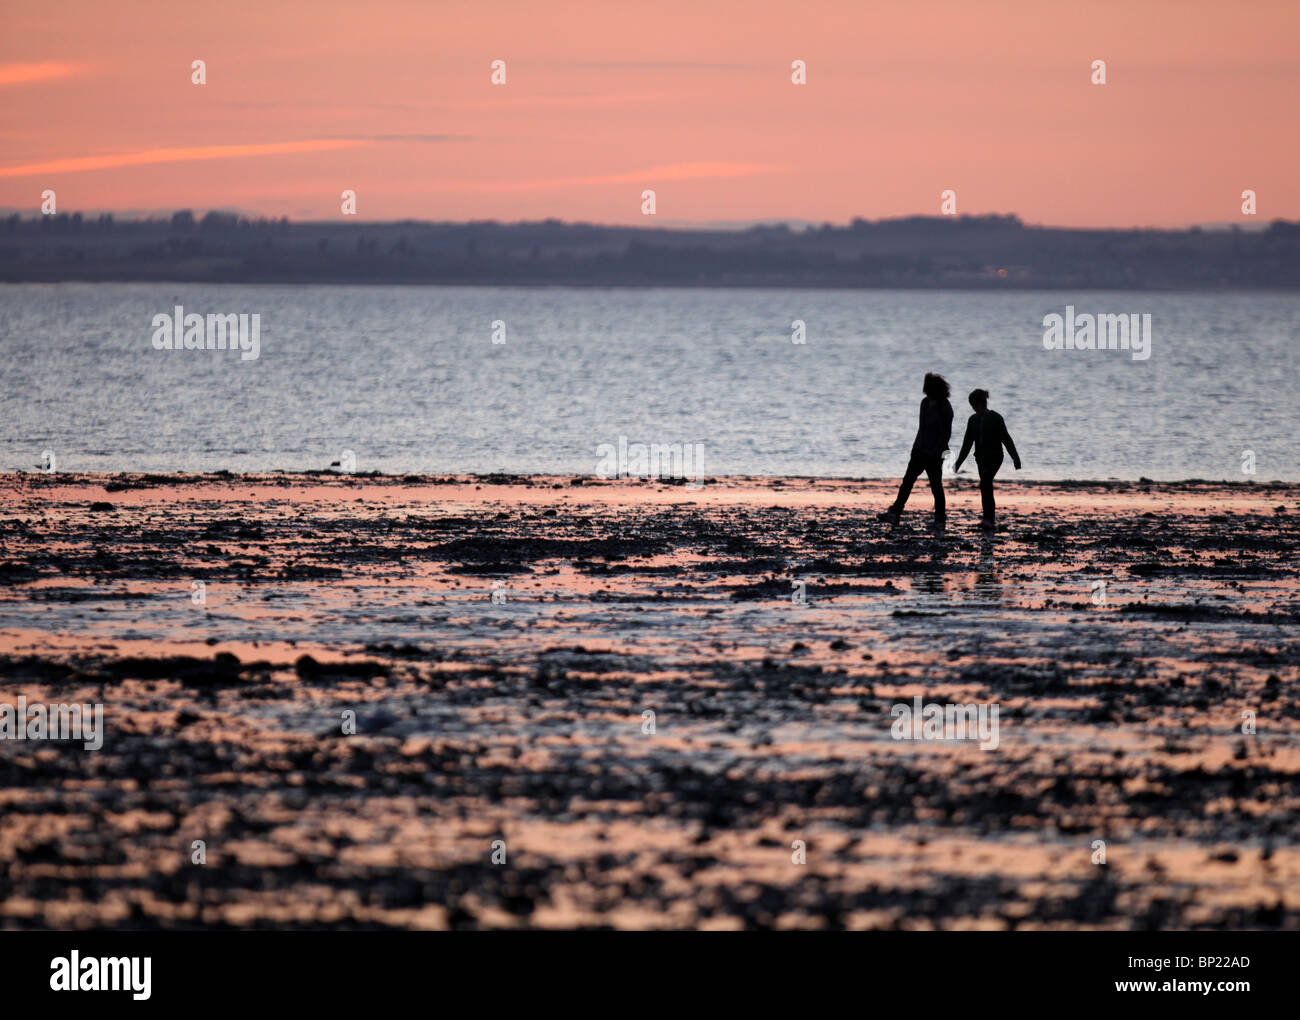 Silhouette of people walking on the beach at sunset at low tide in Whitstable, Kent, United Kingdom. Stock Photo